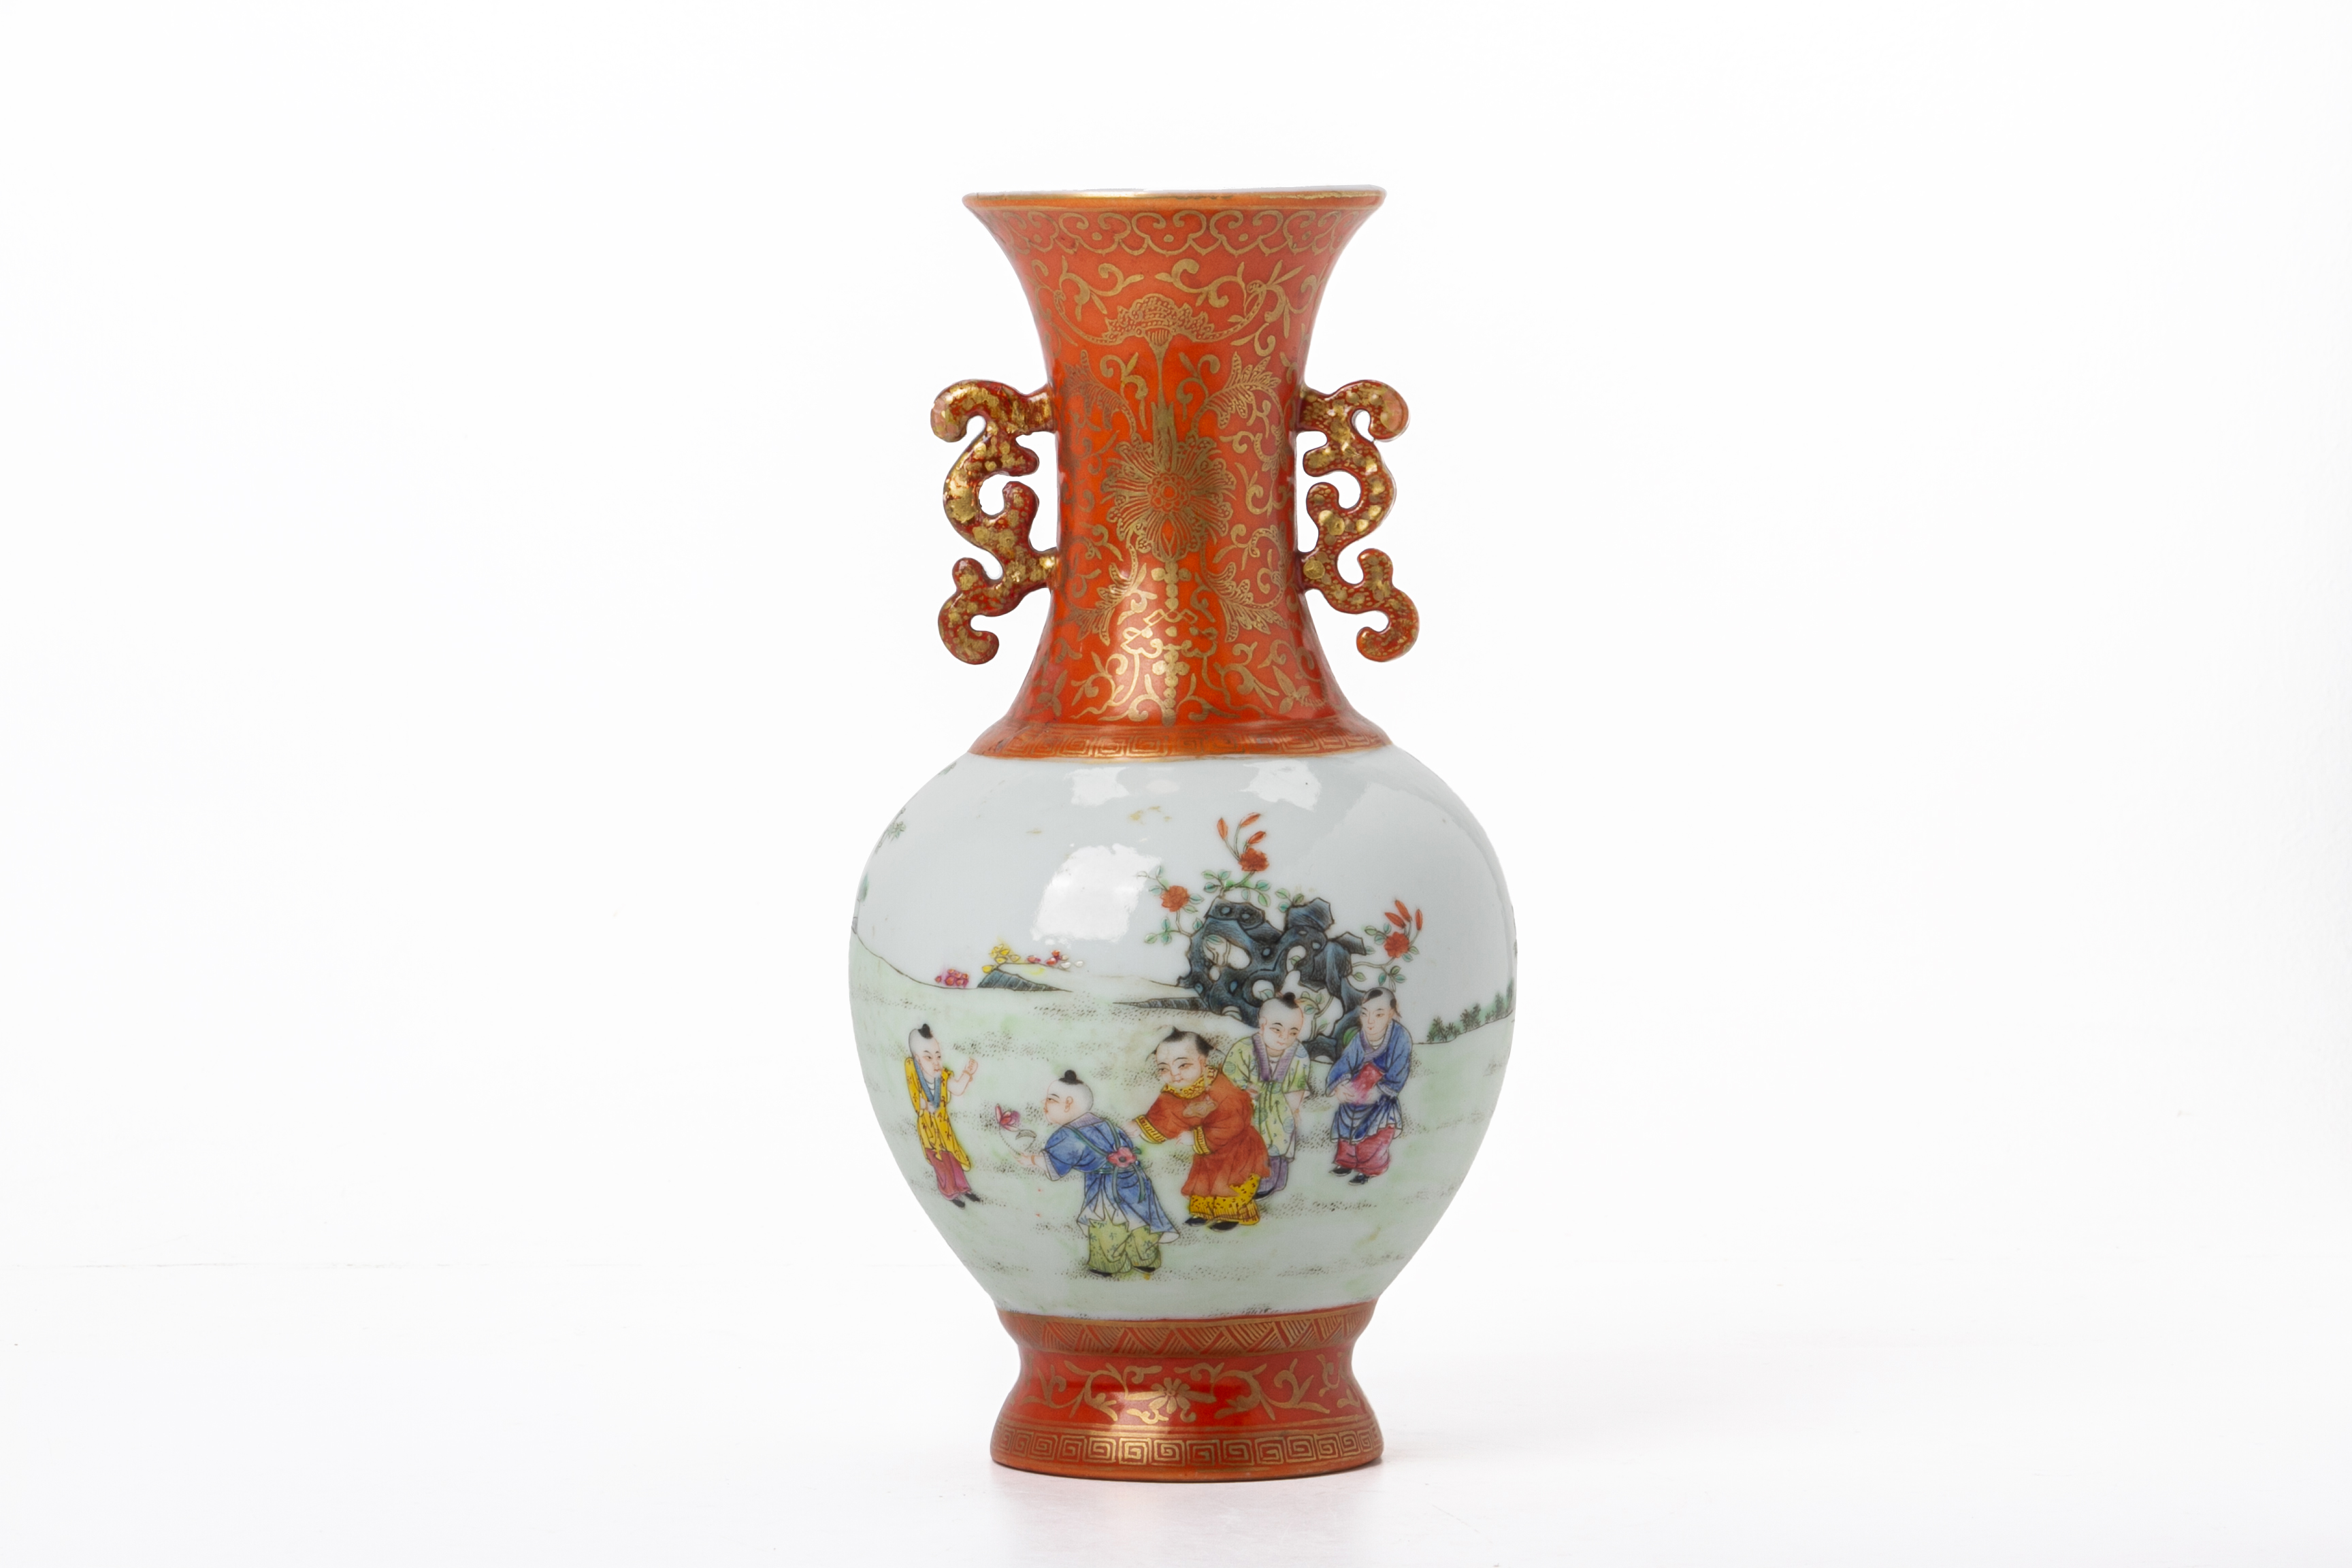 A CORAL GROUND FAMILLE ROSE TWIN HANDLED PORCELAIN VASE - Image 2 of 5